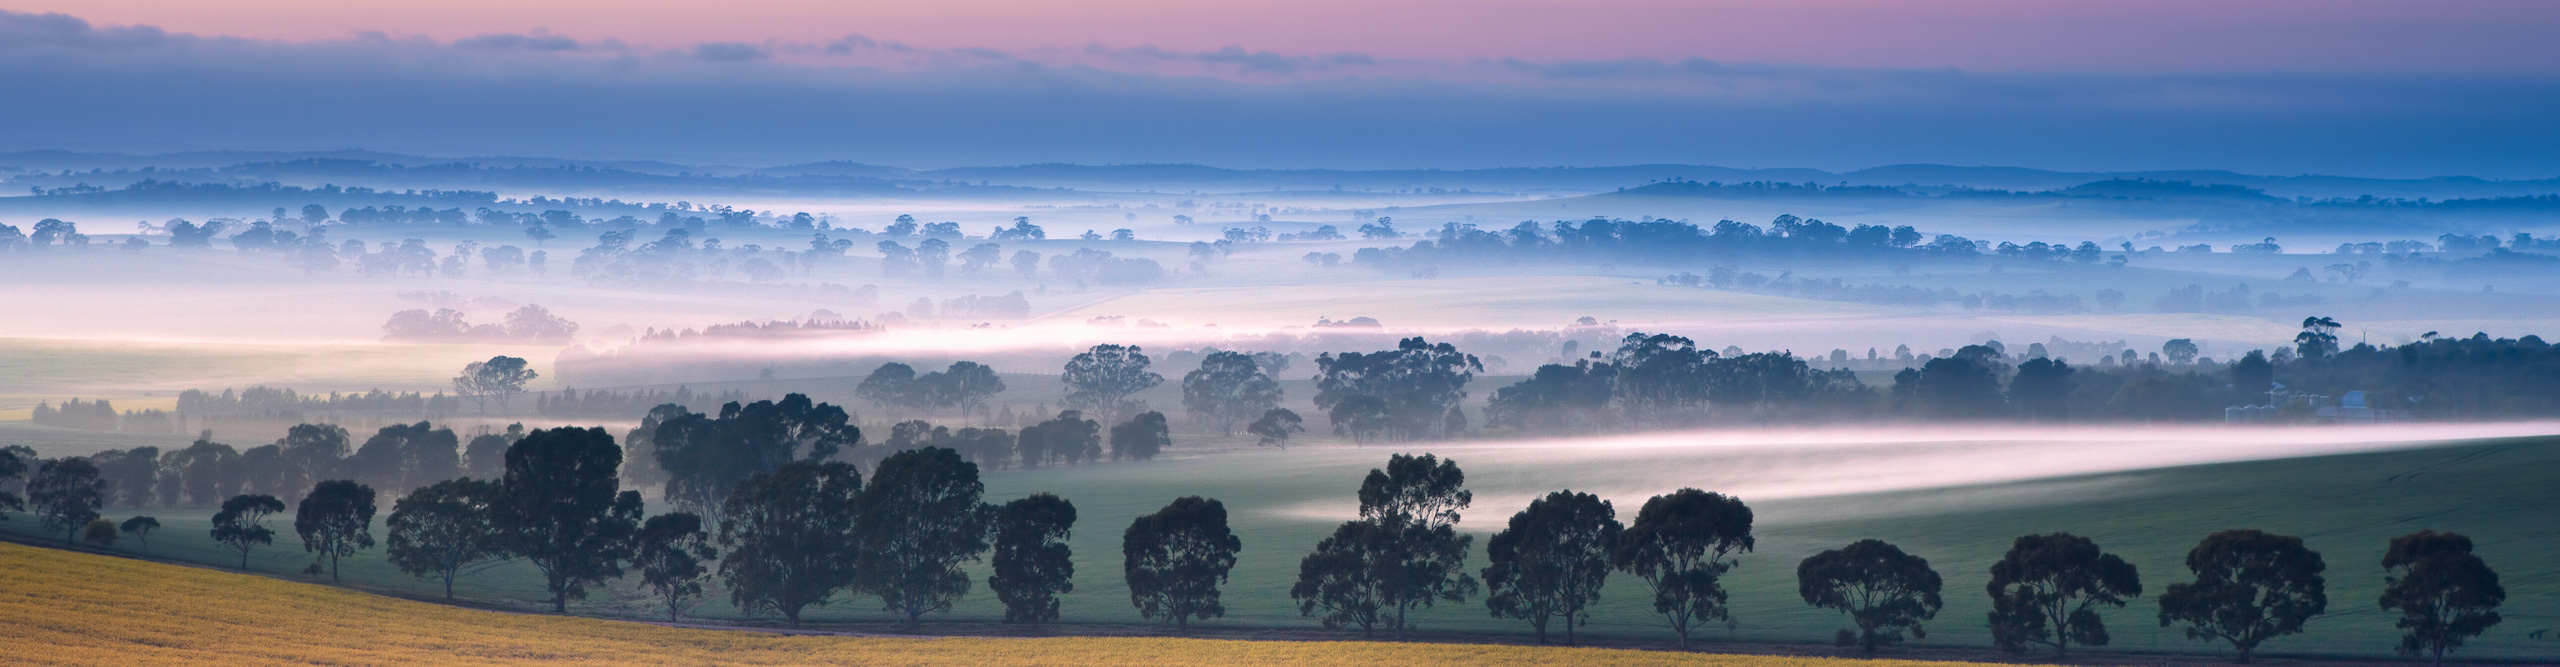 A misty sunrise over the vineyards of the Clare Valley in South Australia 